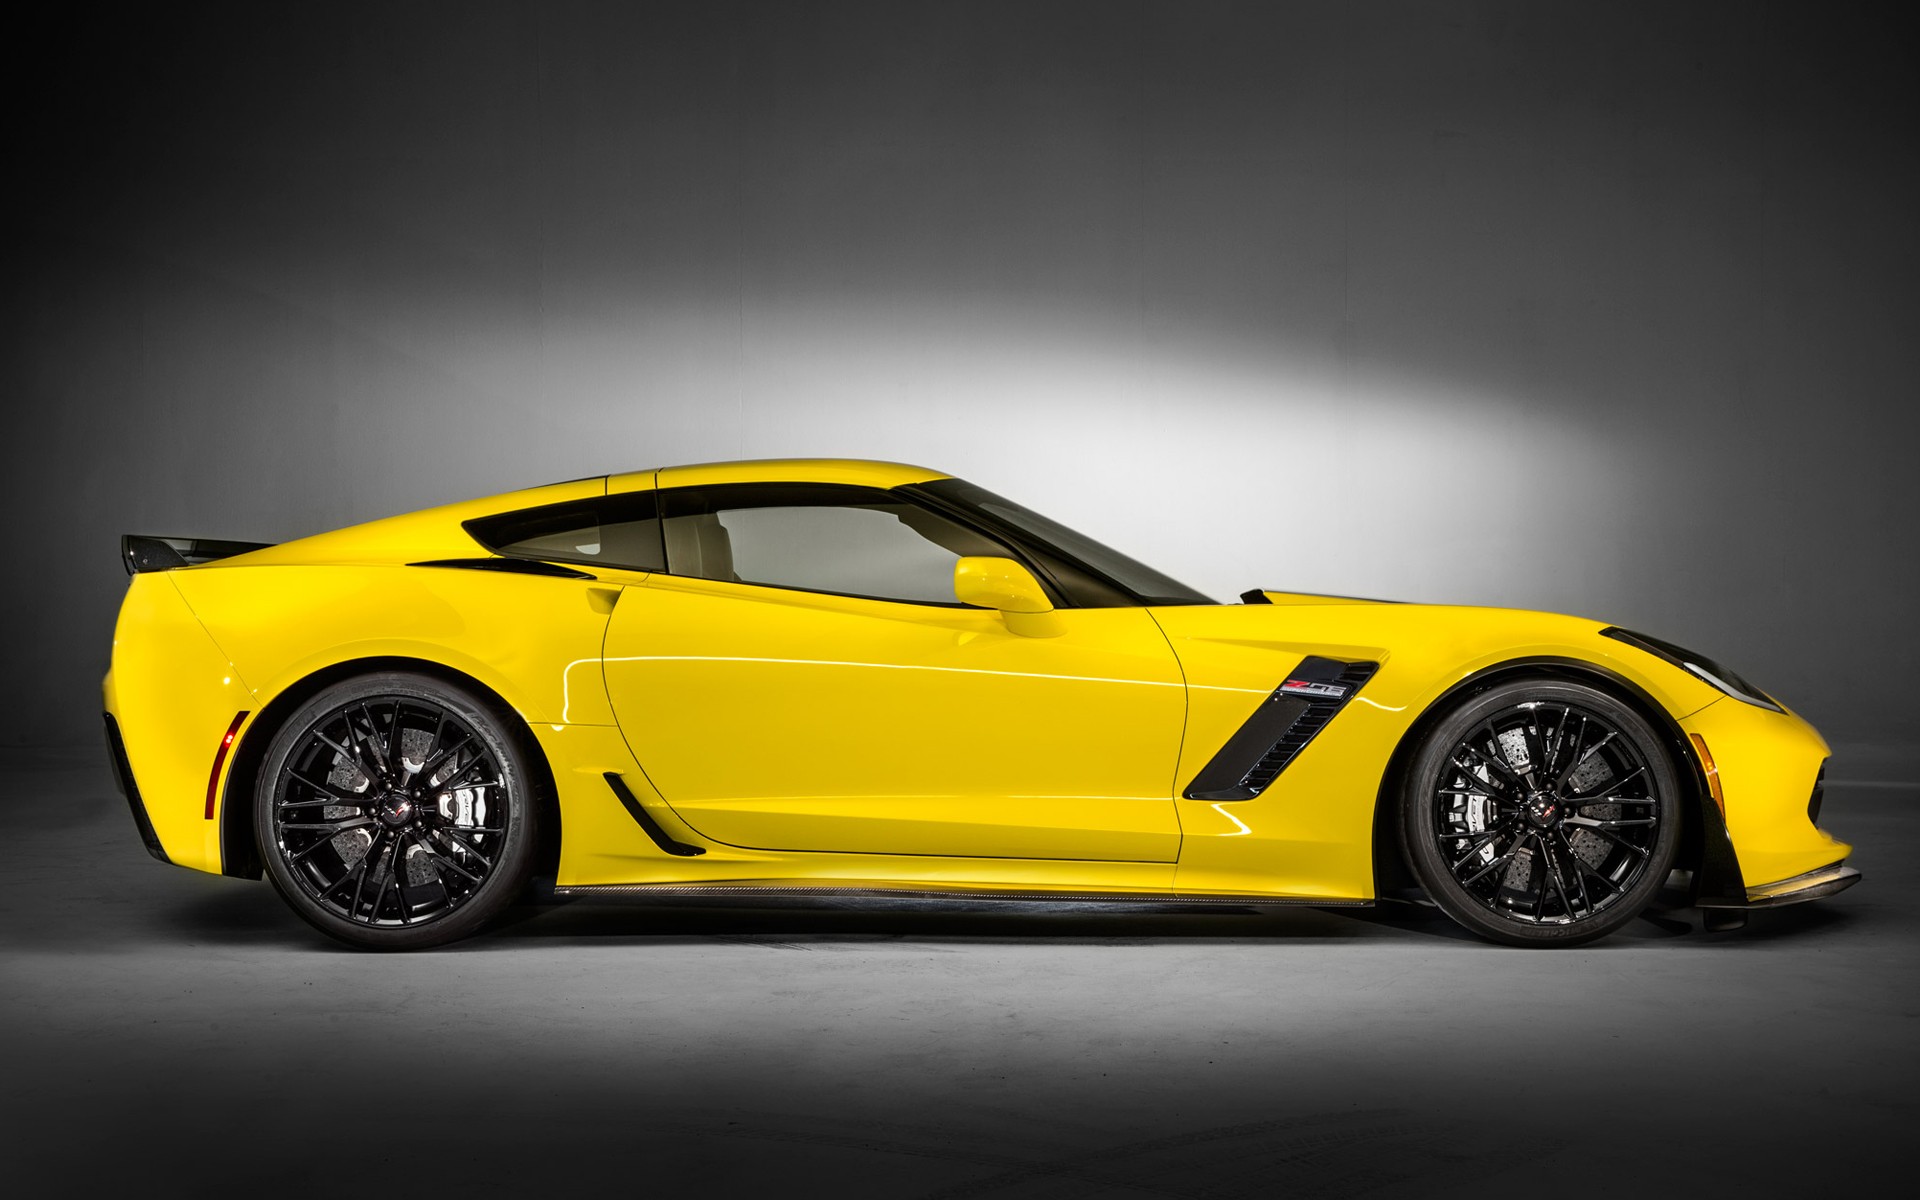 2015 Chevrolet Corvette Z06 Chevrolet Corvette Z06 Car Yellow Cars Side View 1920x1200